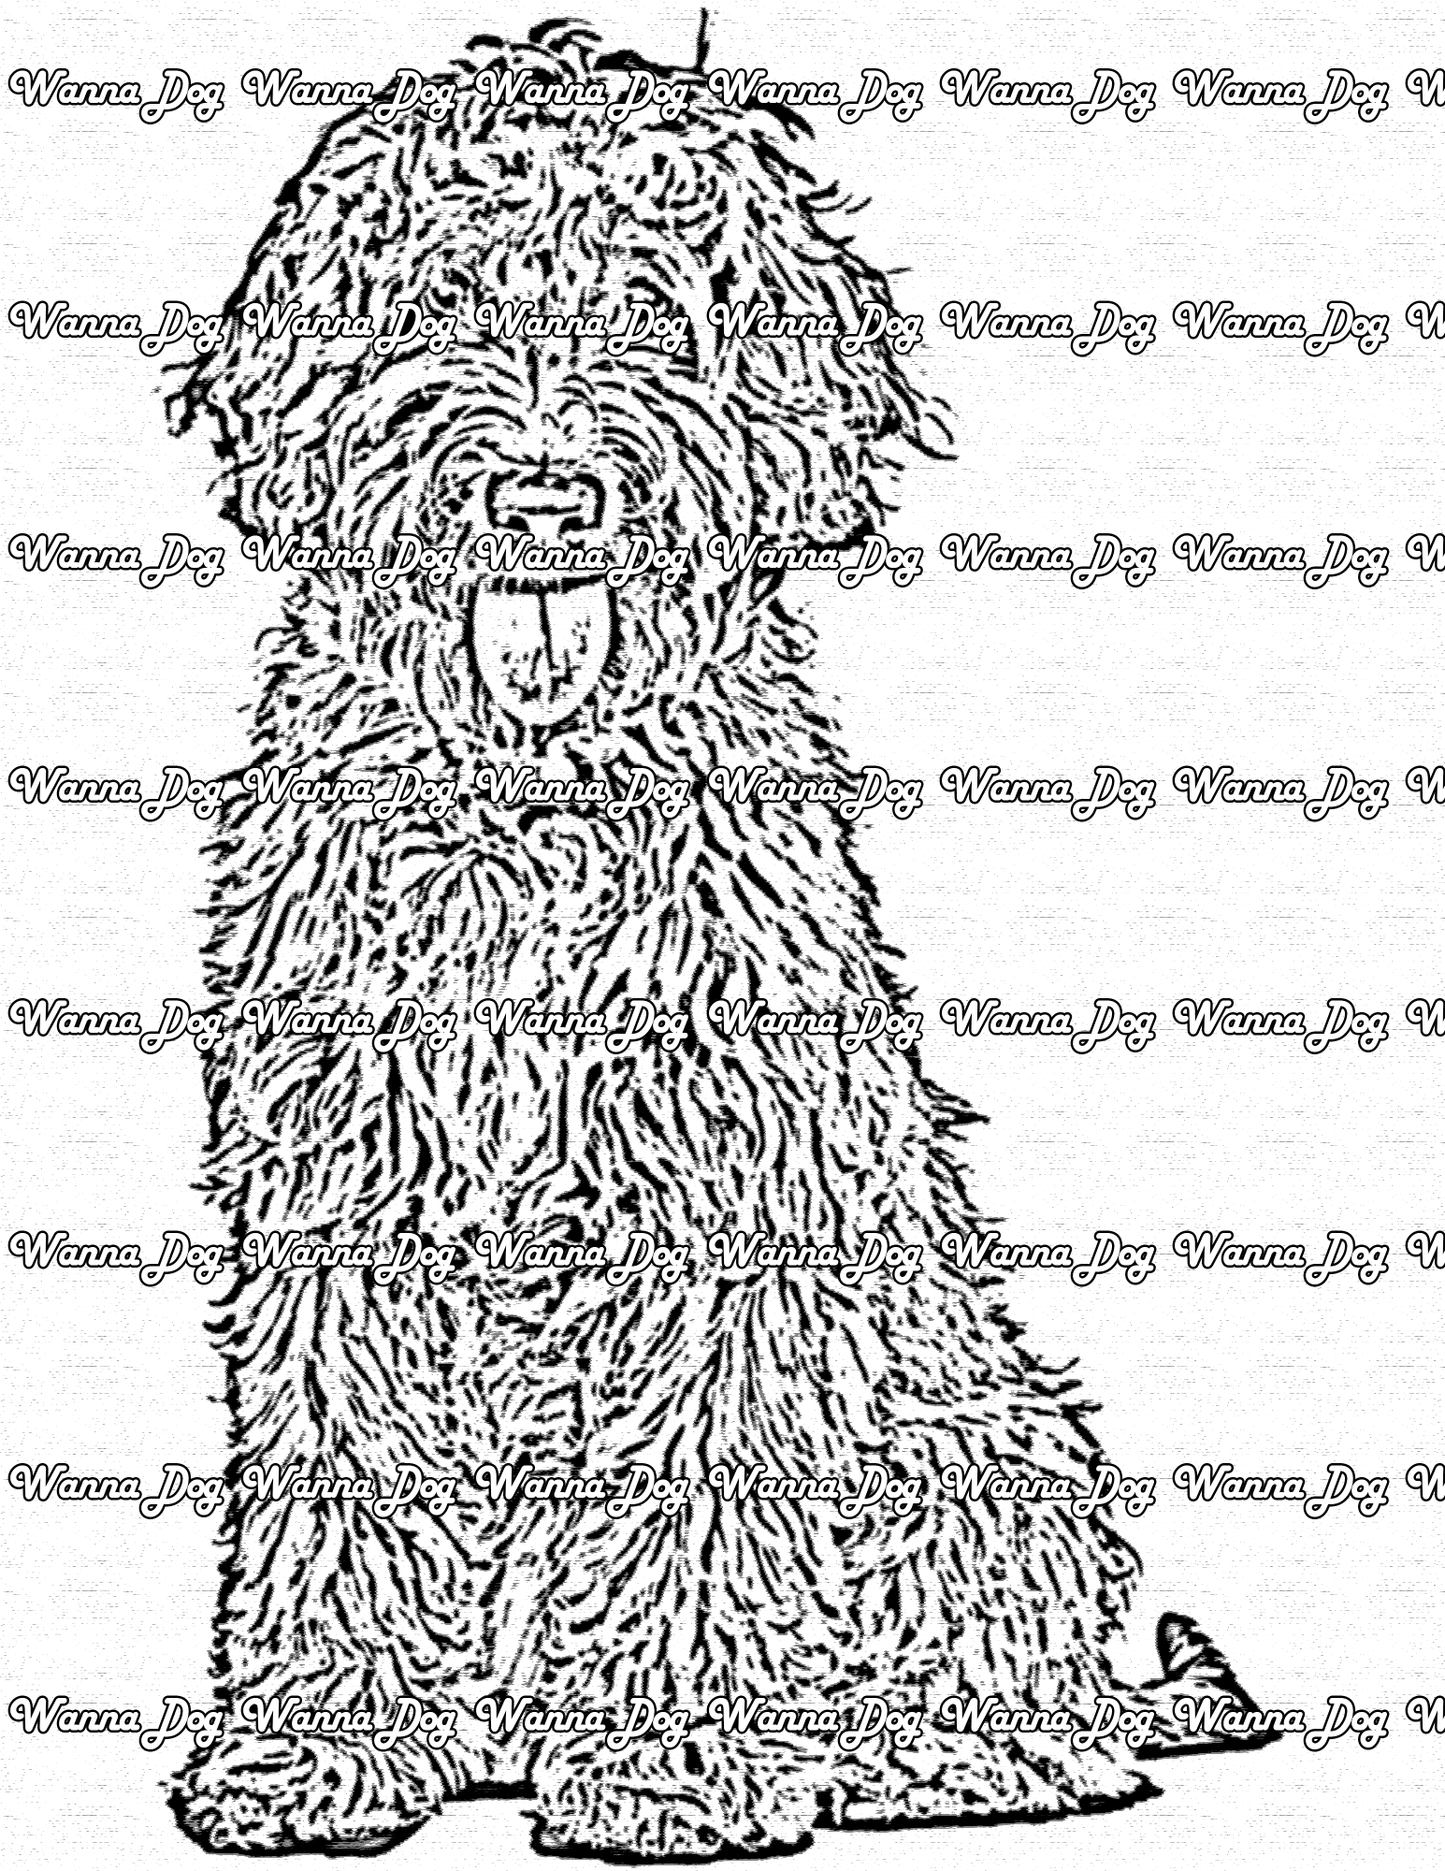 Labradoodle Coloring Page of a Labradoodle sitting with their tongue out